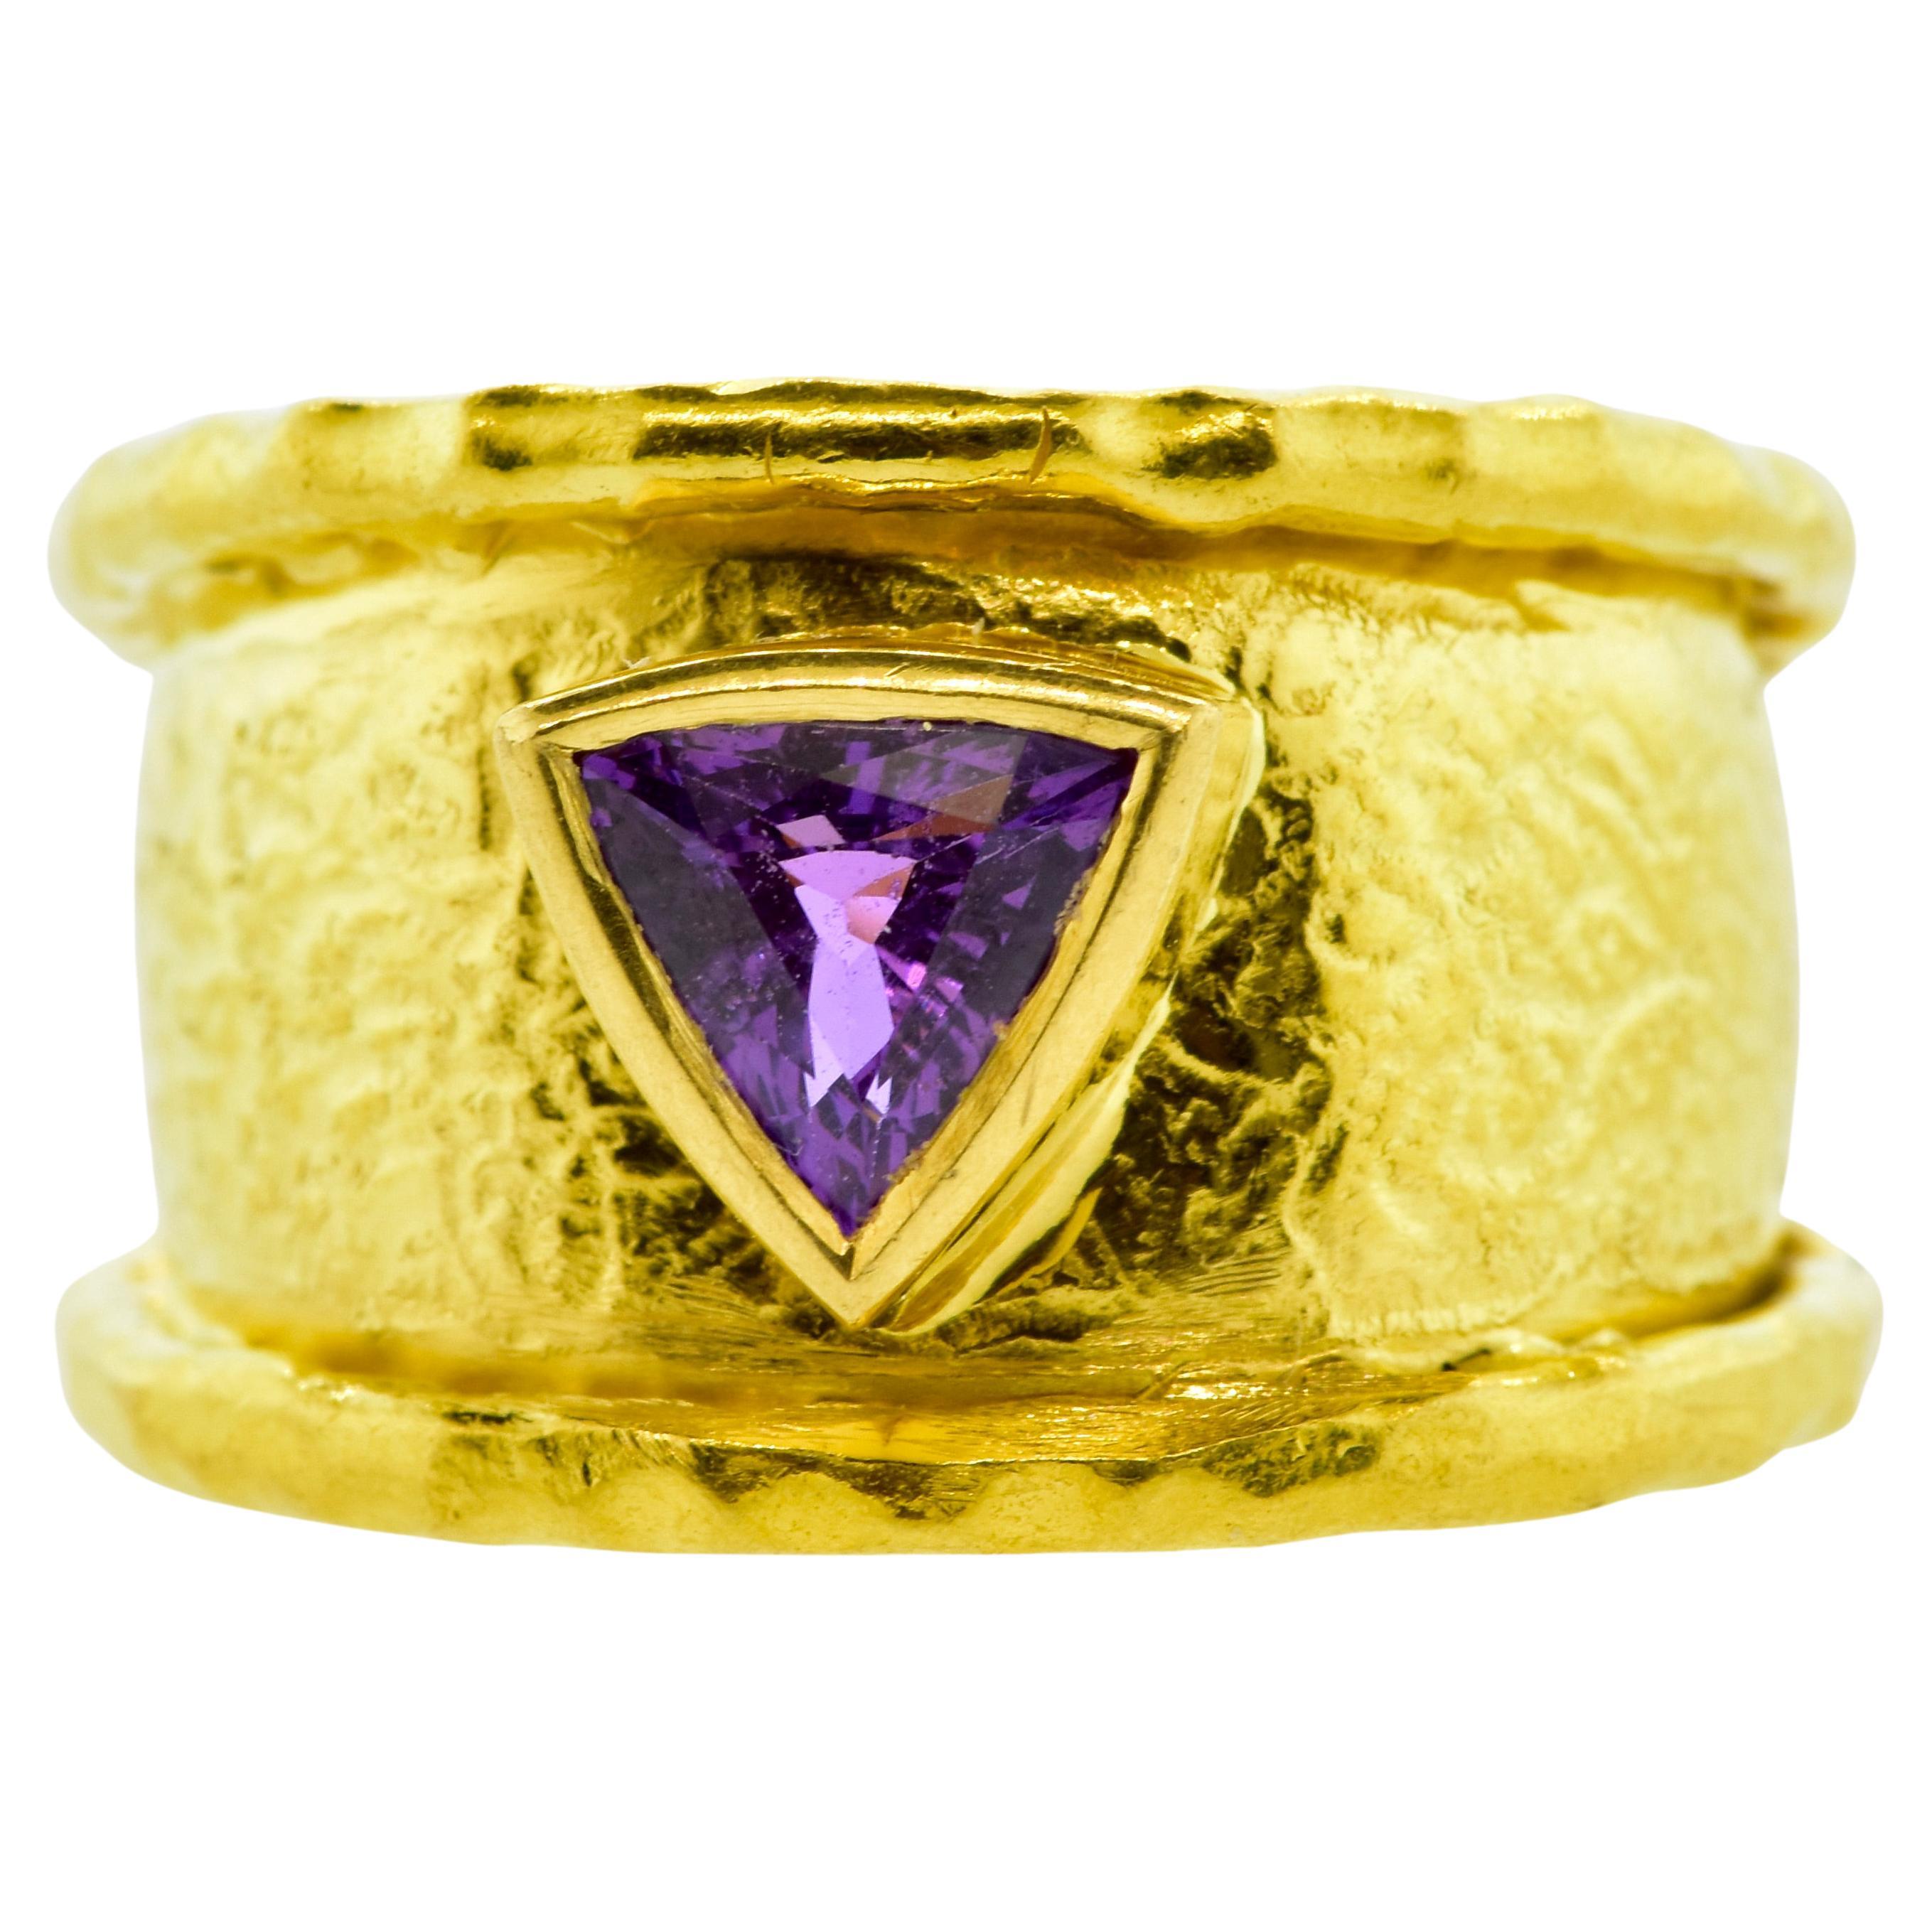 Jean Mahie Gold and Fancy Cut Fine Purple Sapphire Ring, French,  c. 1990